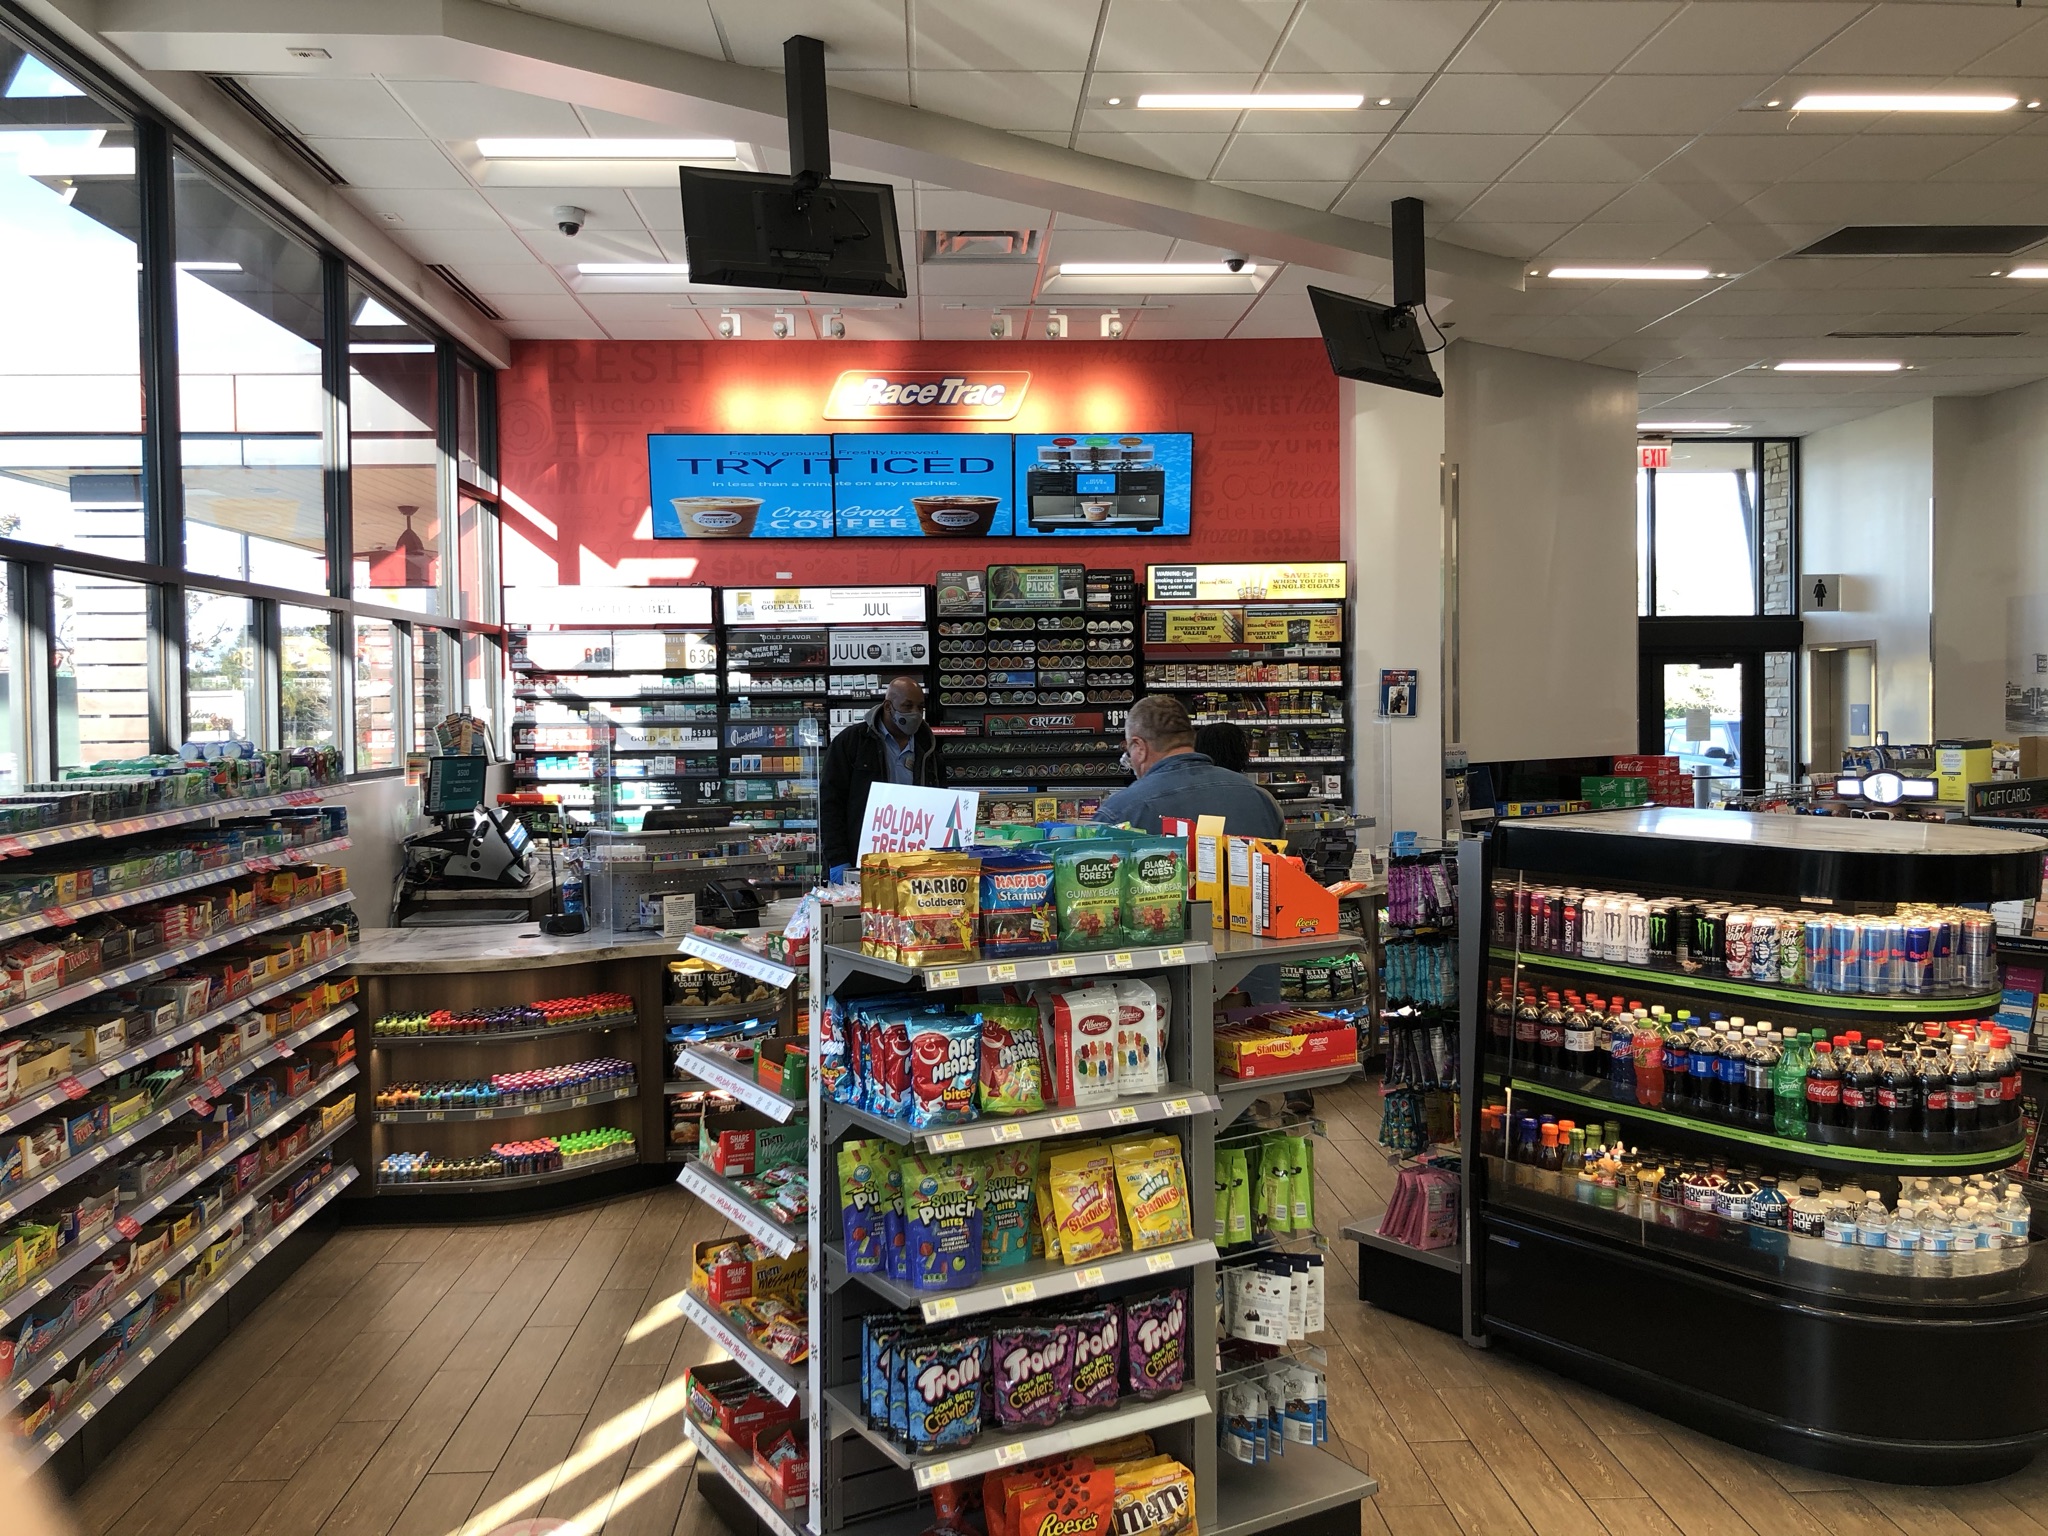 Available property at RaceTrac Store Interior 